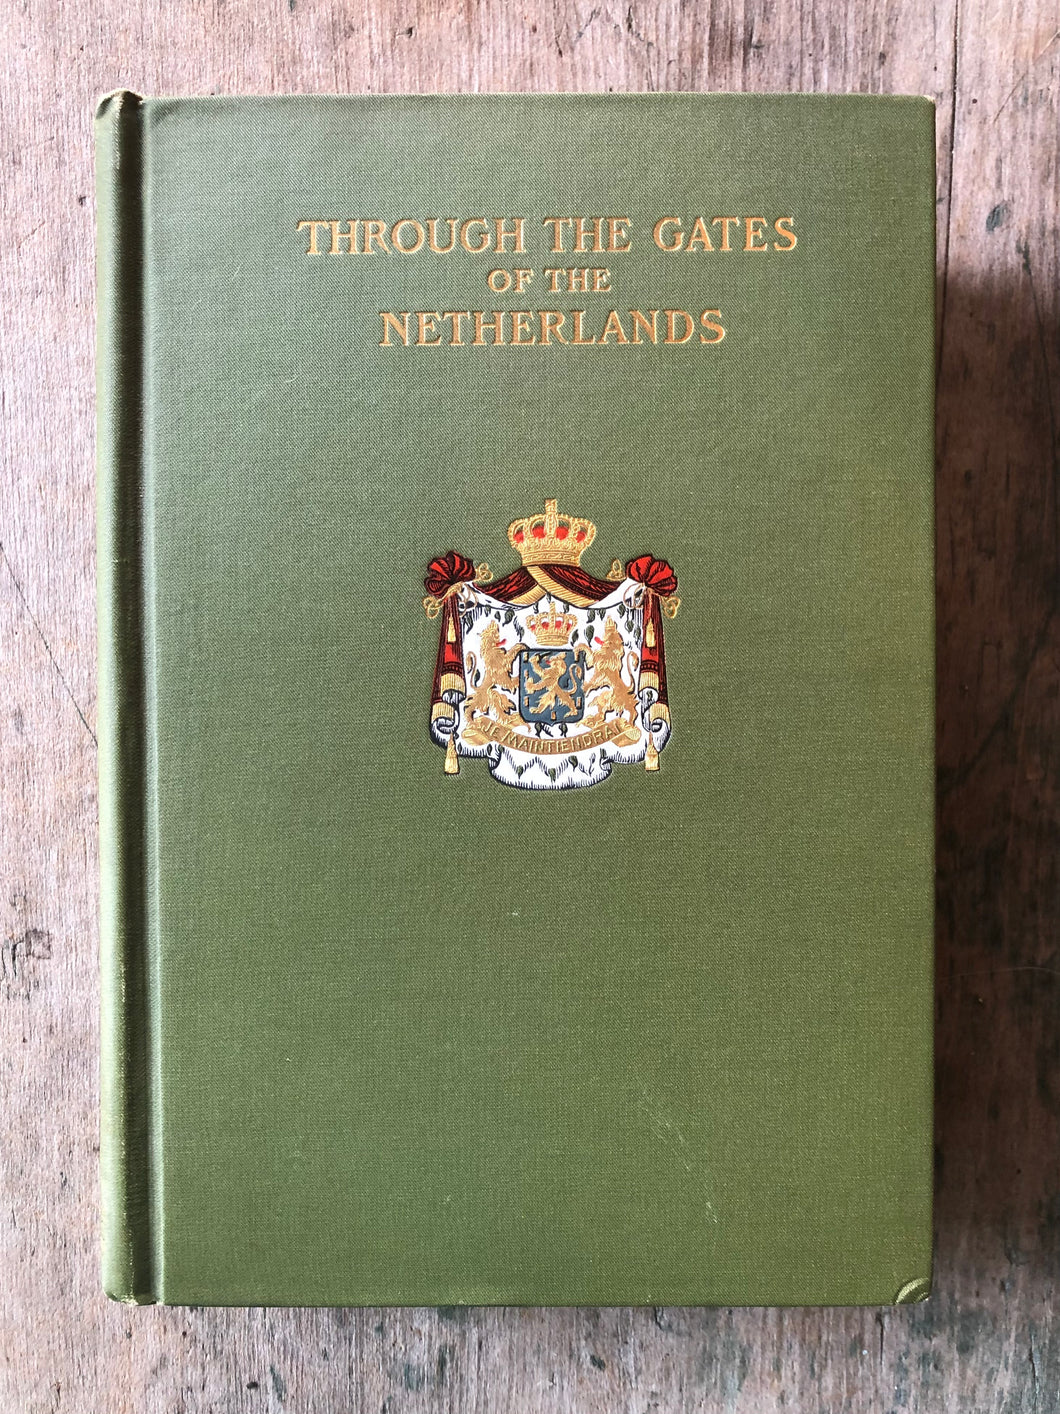 Through the Gates of the Netherlands by Mary E. Waller